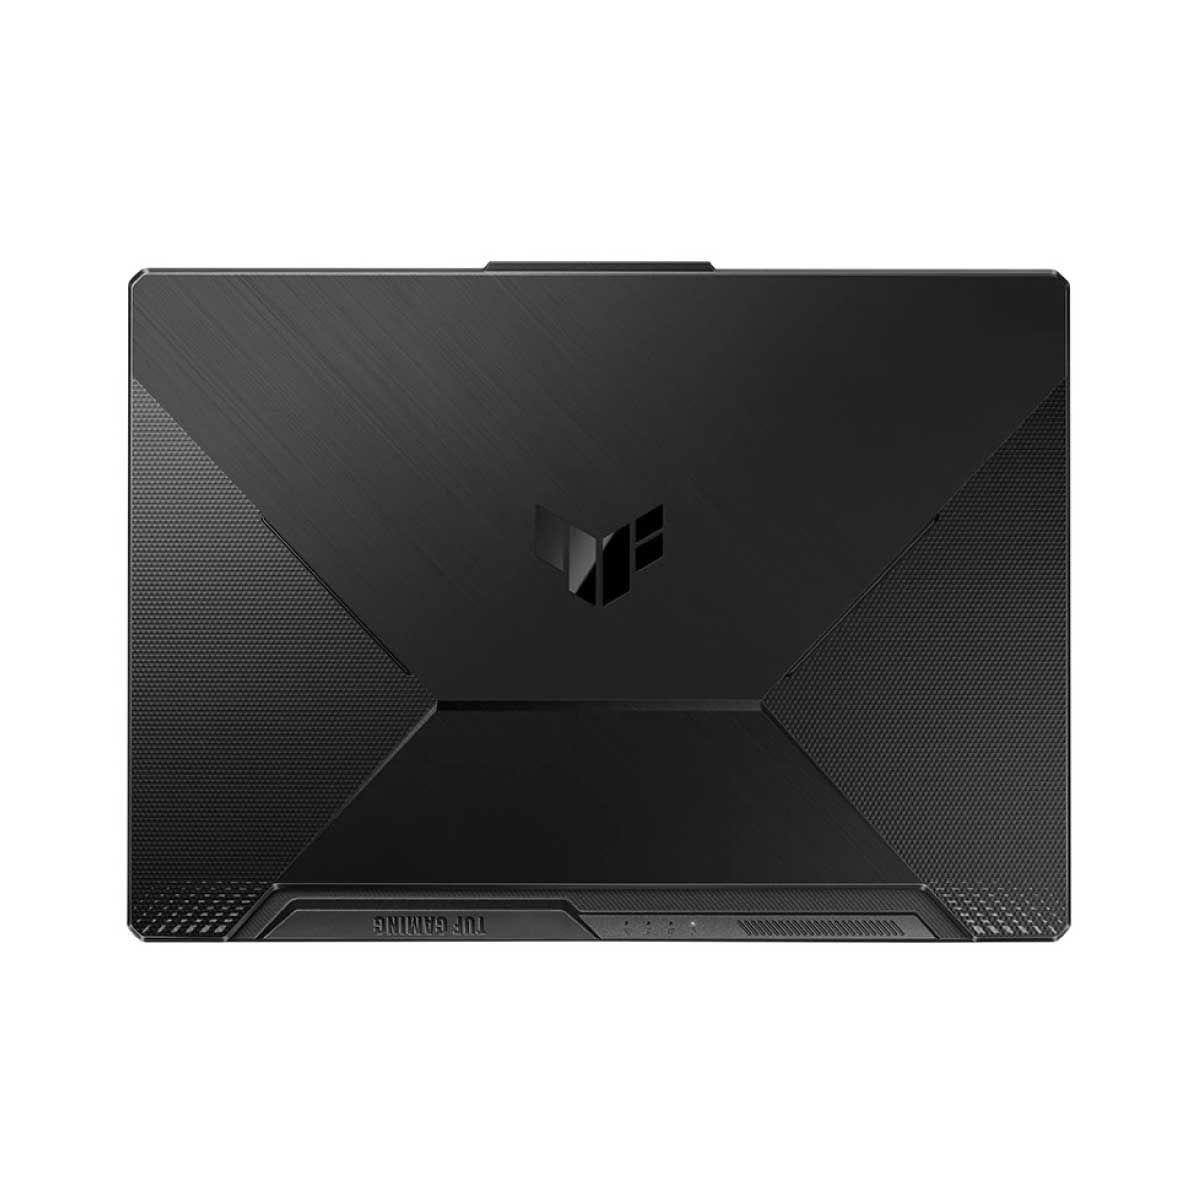 NOTEBOOK (โน้ตบุ๊ค) ASUS TUF GAMING A15 FA506NF-HN012W (GRAPHITE BLACK)